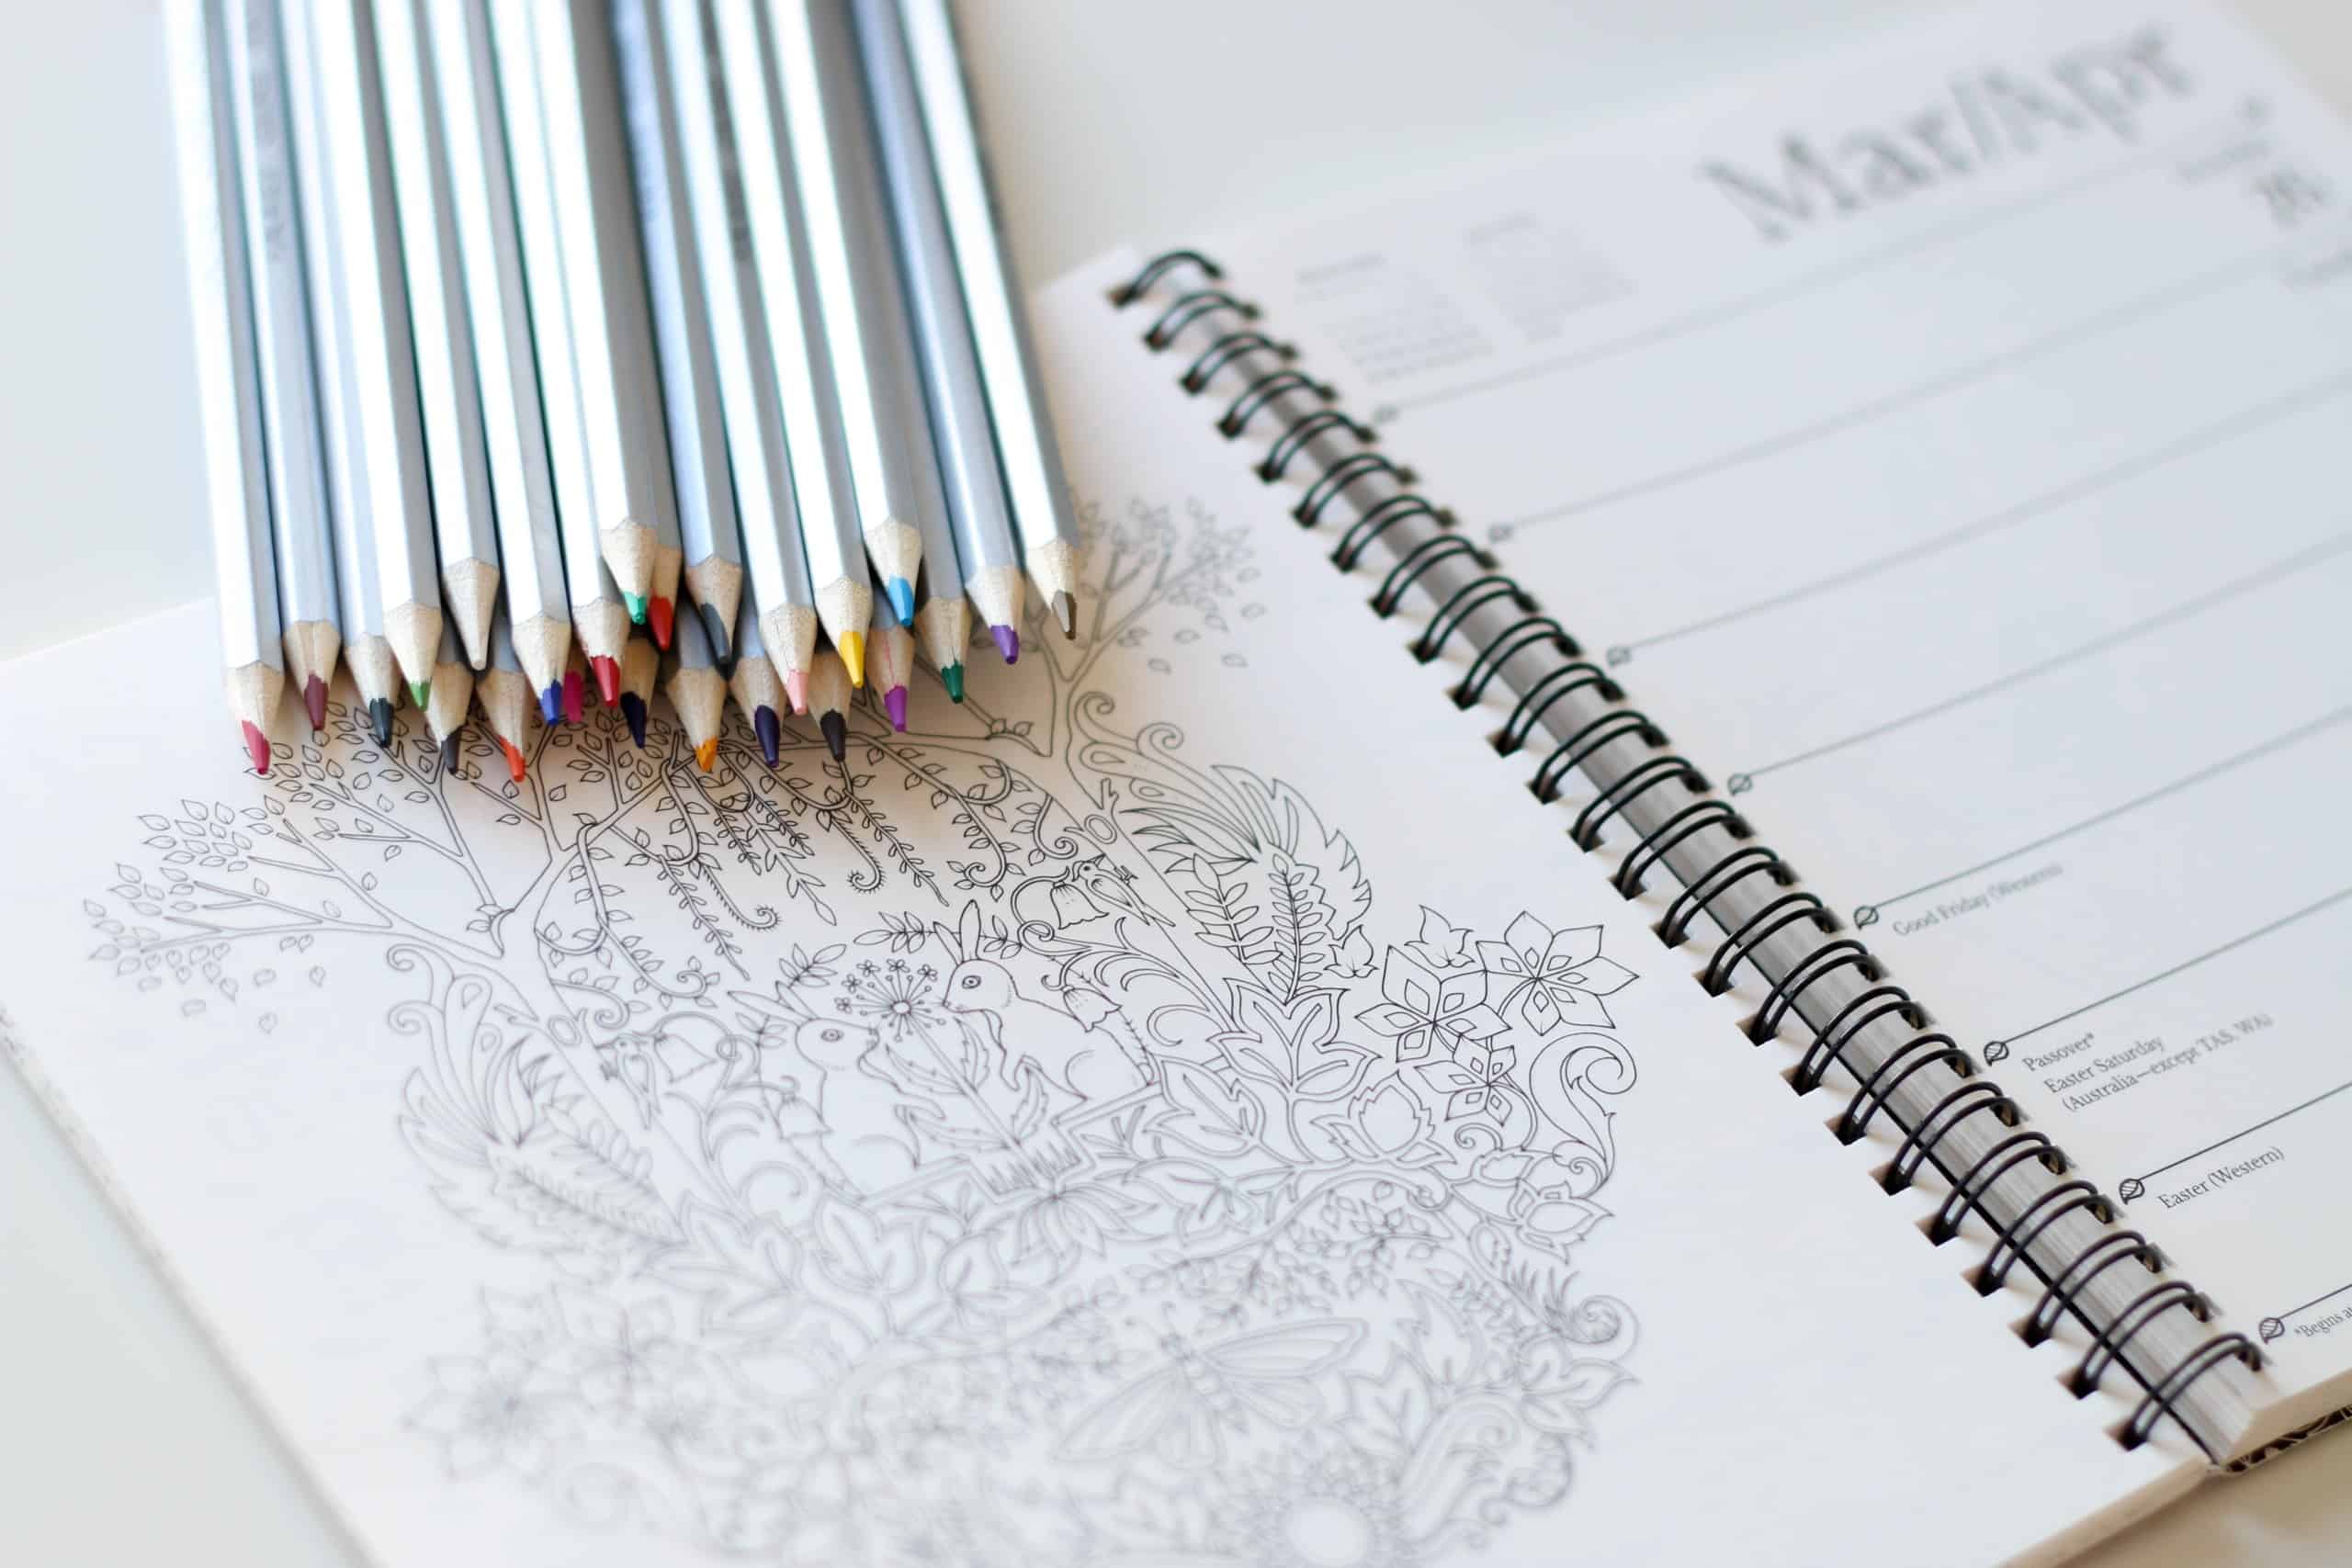 Overview of the Adult Coloring Book Industry